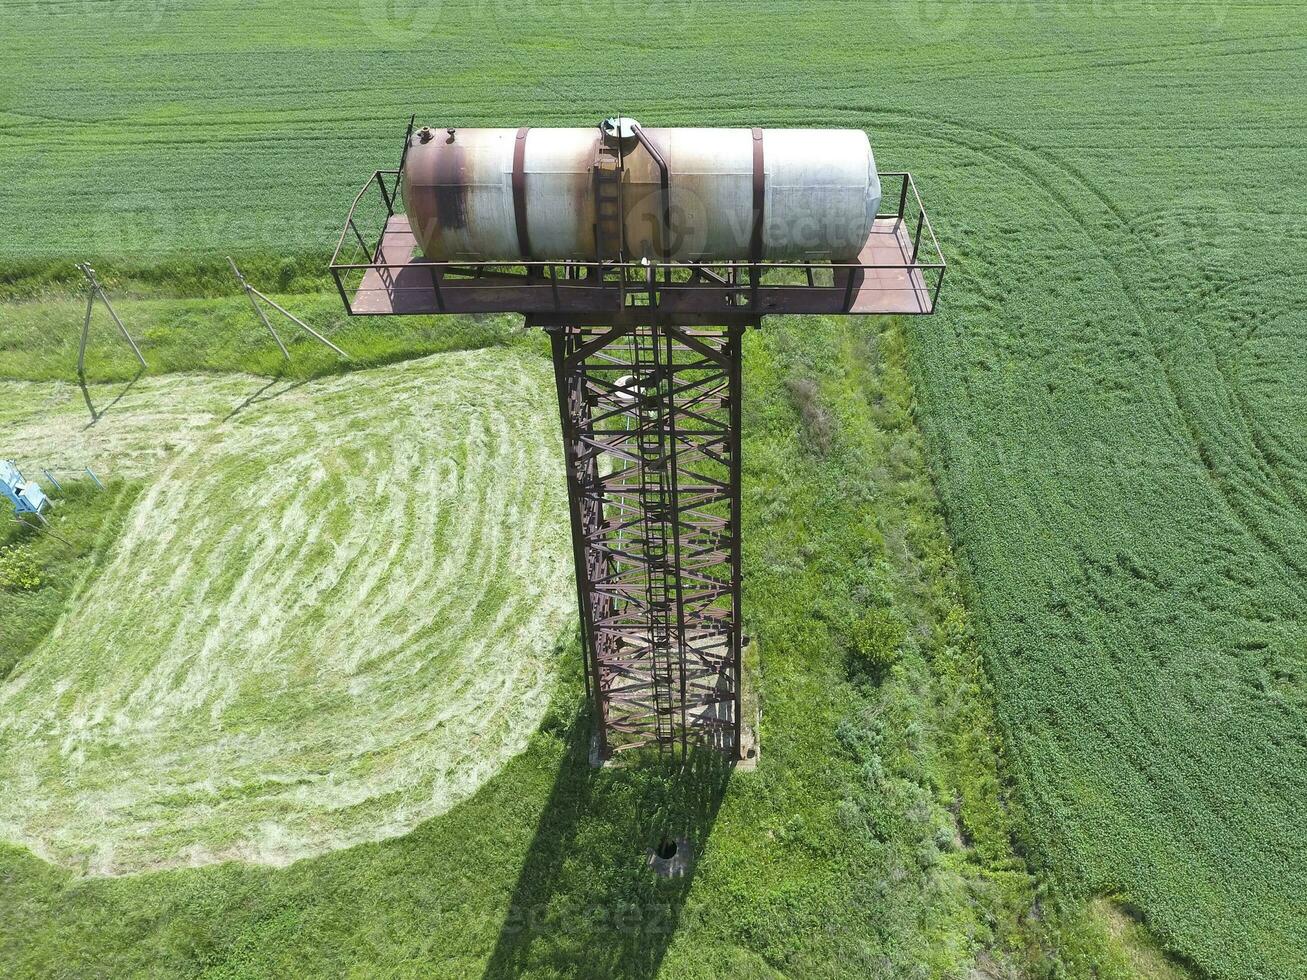 The water tower photo